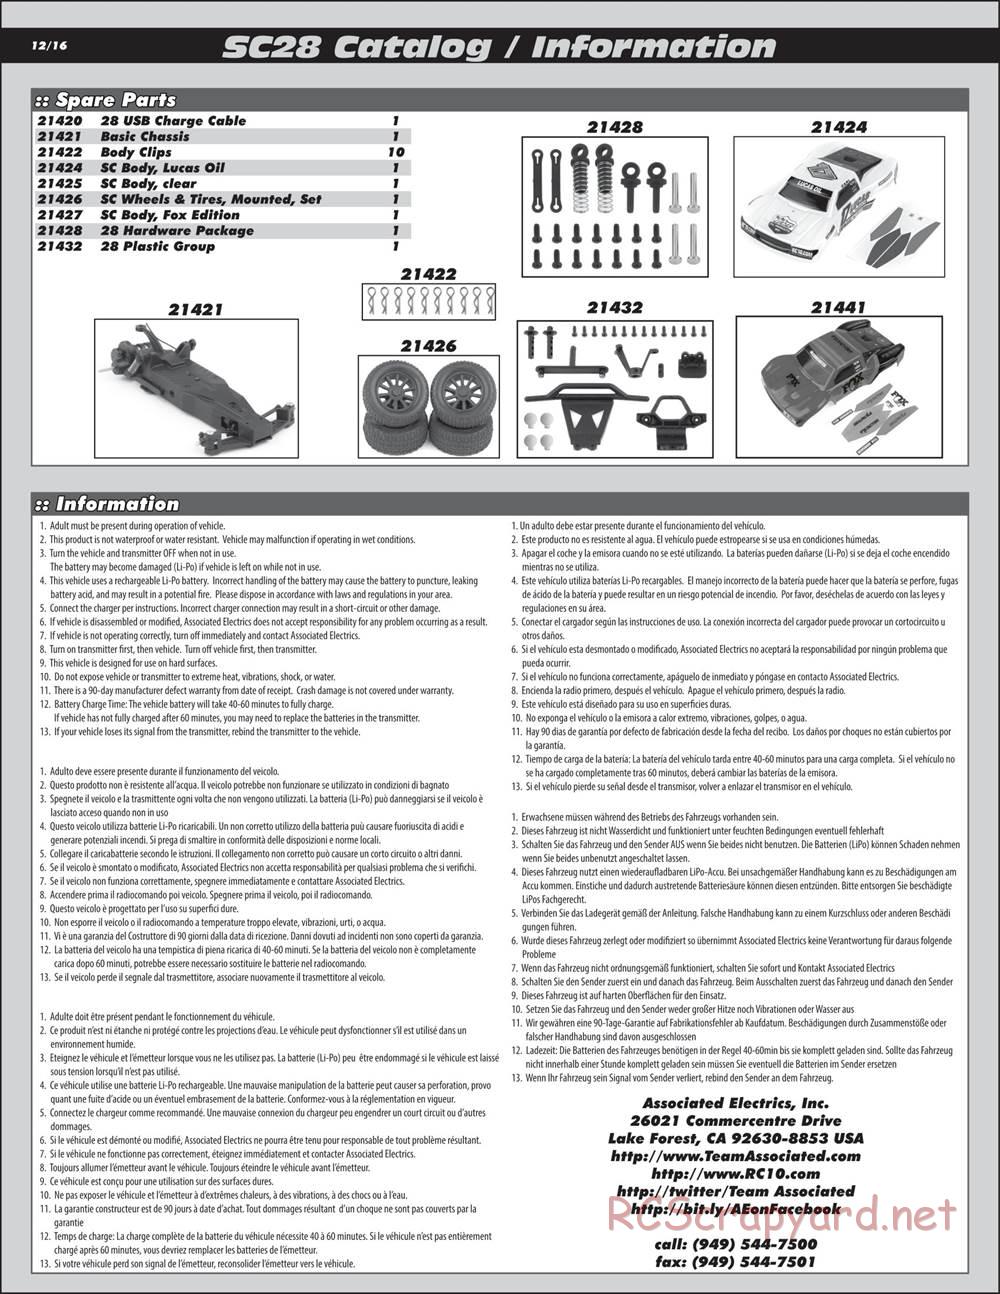 Team Associated - SC28 - Manual - Page 2